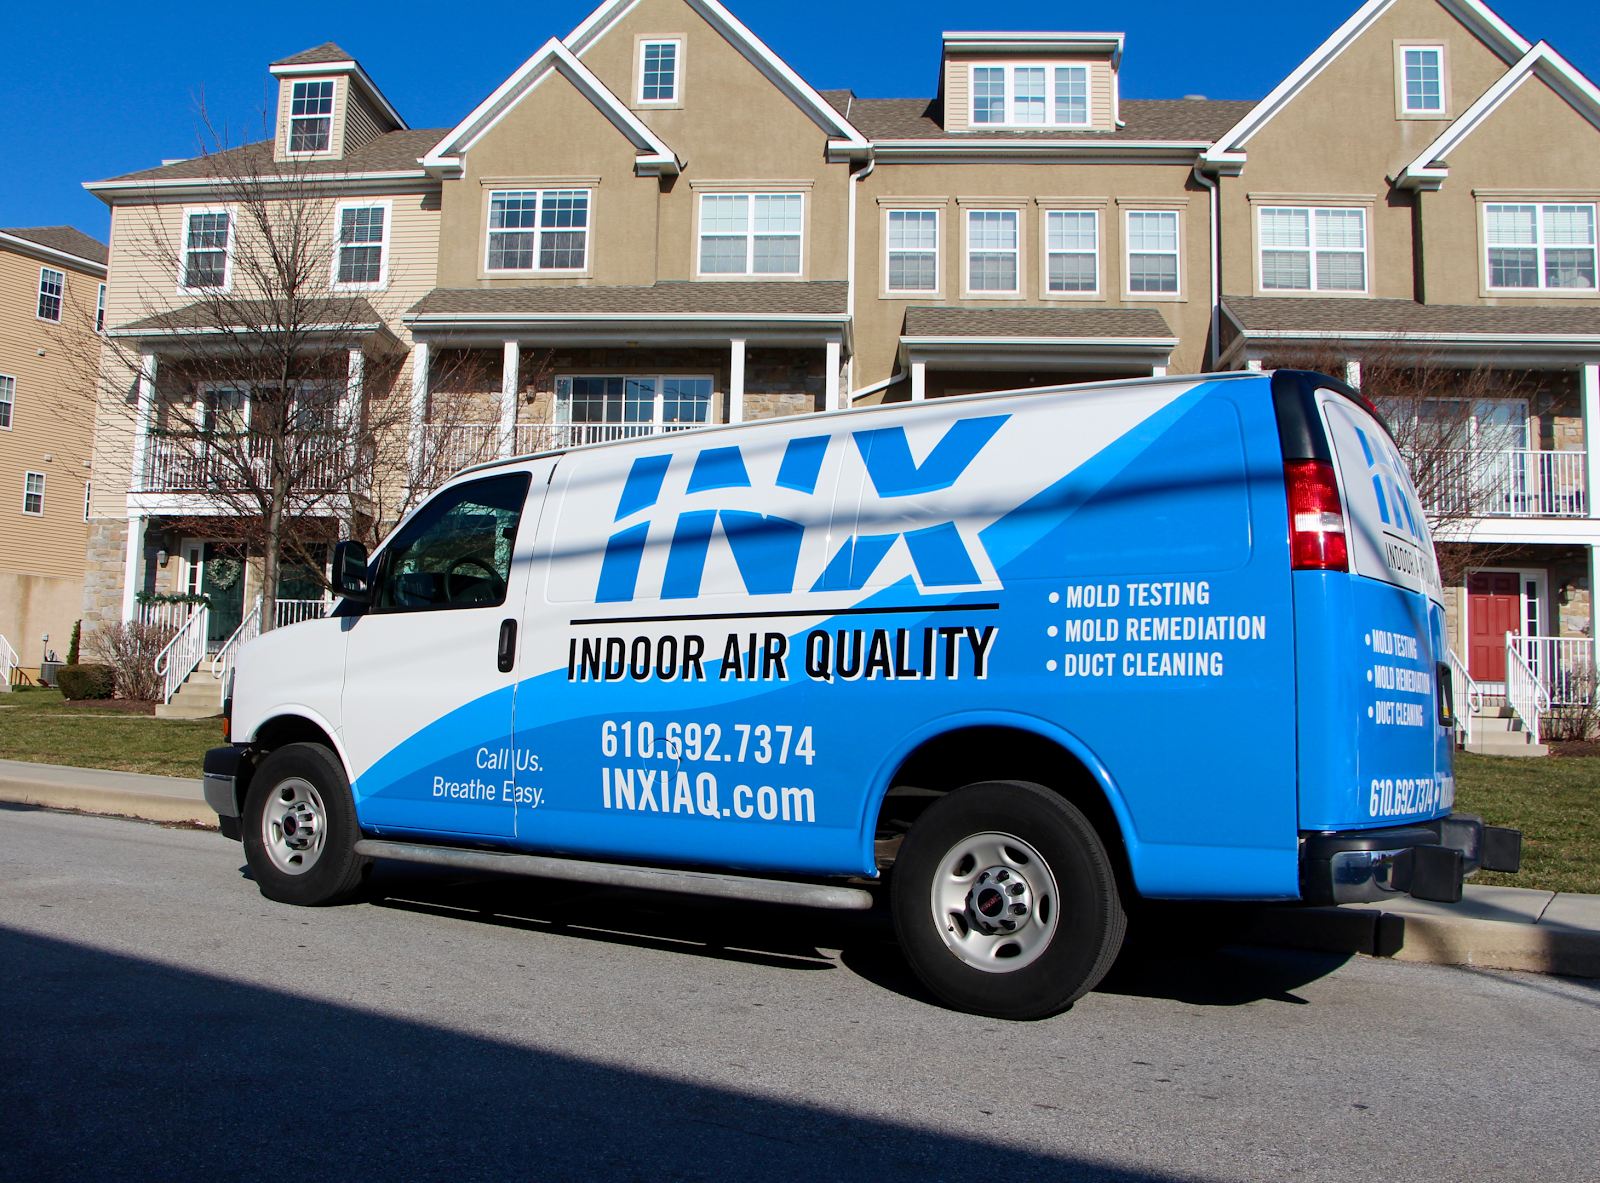 INX Indoor Air Quality professional mold removal ardmore van in front of residential homes